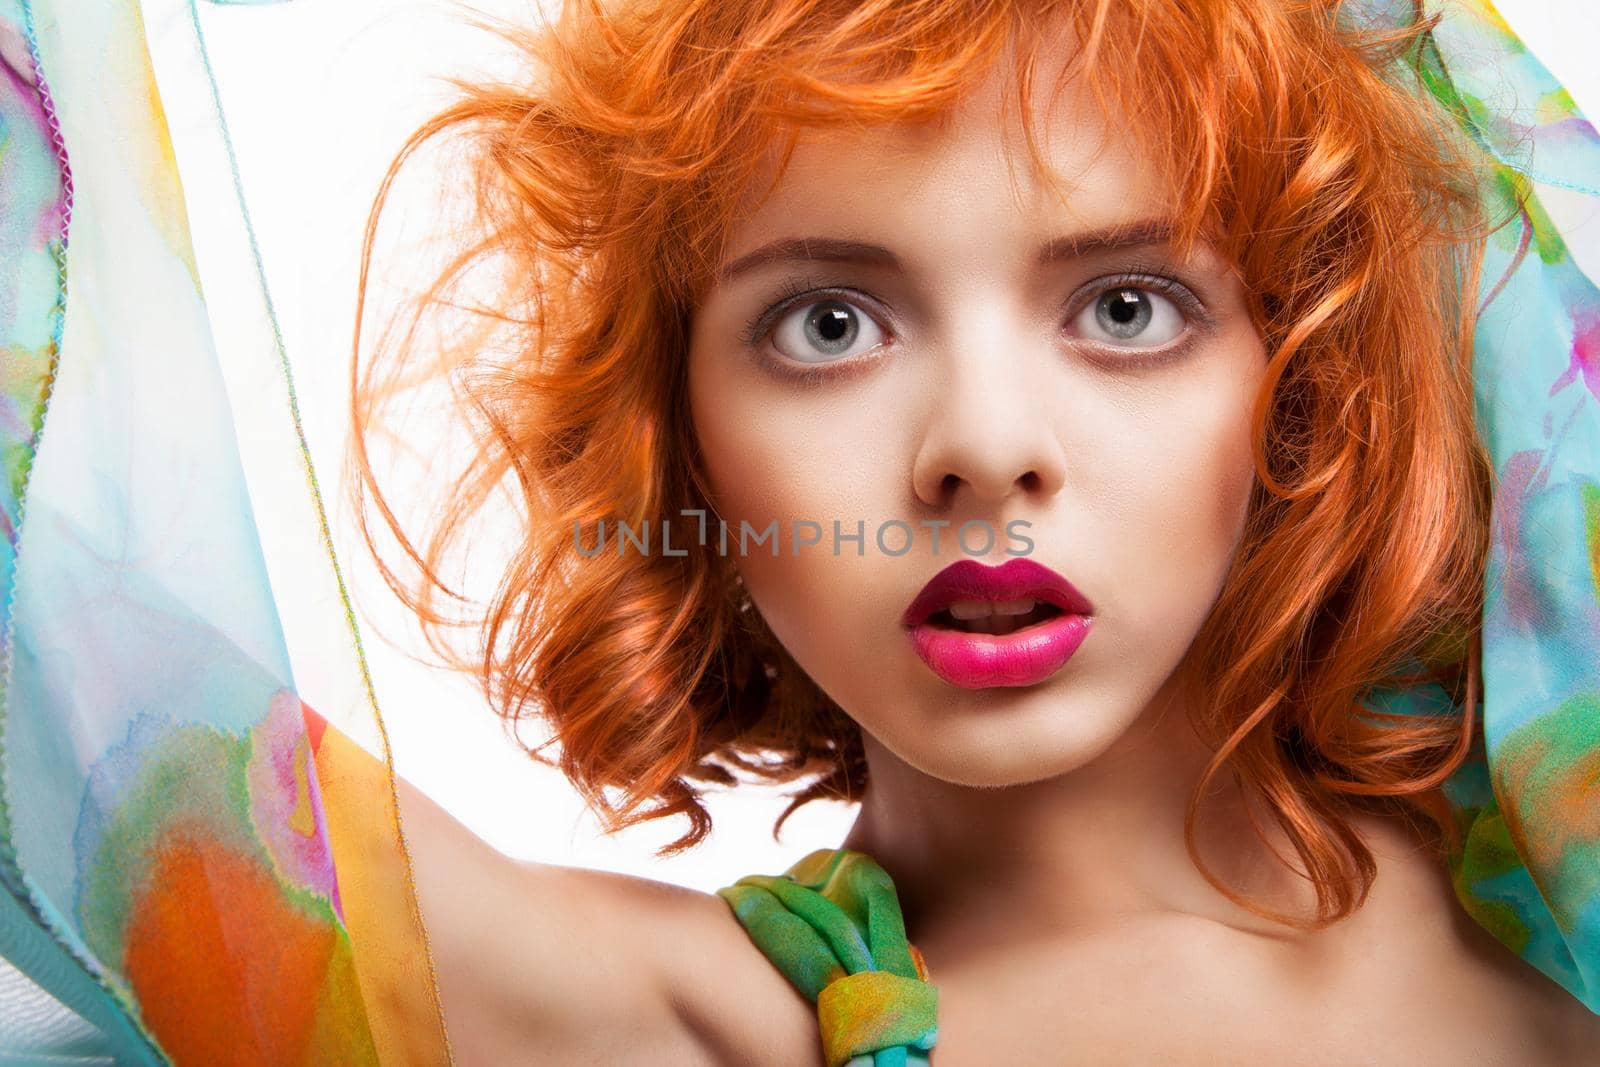 Girl with red hair and colorful dress over white by Julenochek